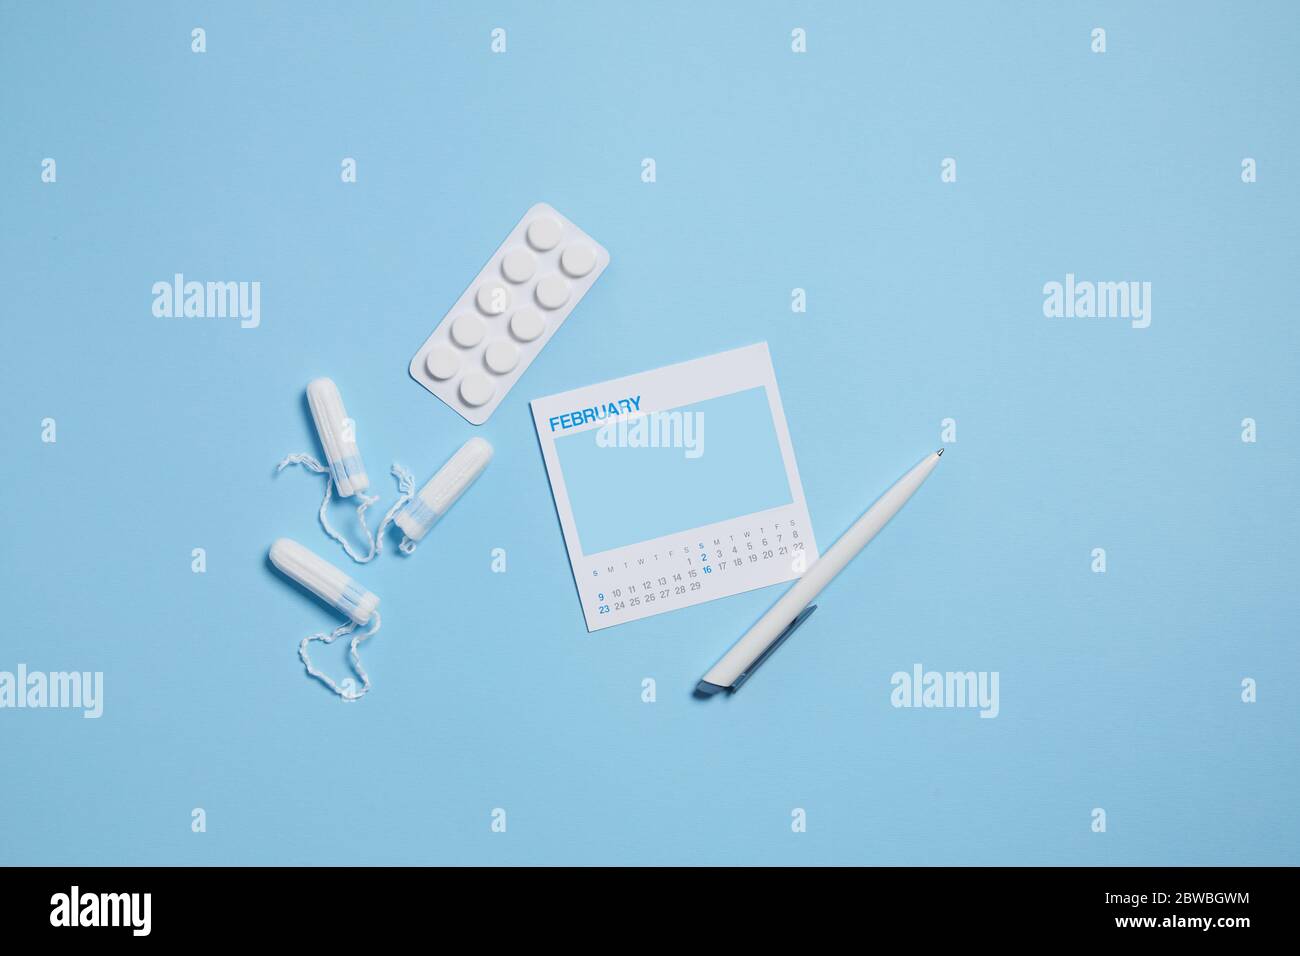 menstrual sanitary tampon, pain pills during menstruation on blue background, feminine calendar with mock up. Feminine hygiene products. top view. Stock Photo